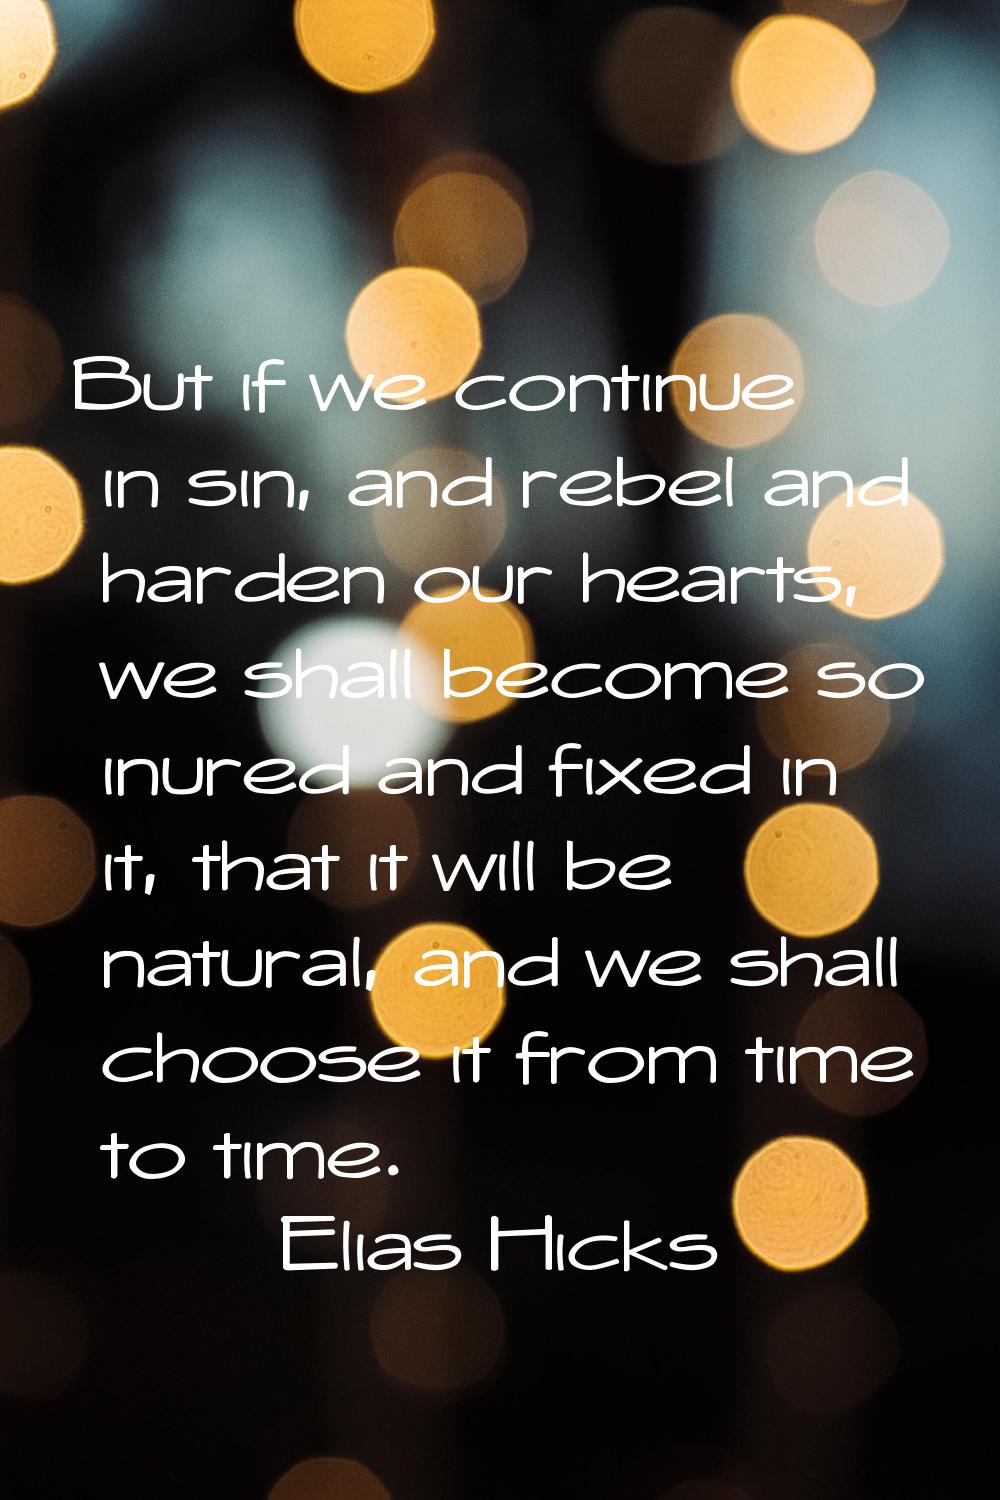 But if we continue in sin, and rebel and harden our hearts, we shall become so inured and fixed in 